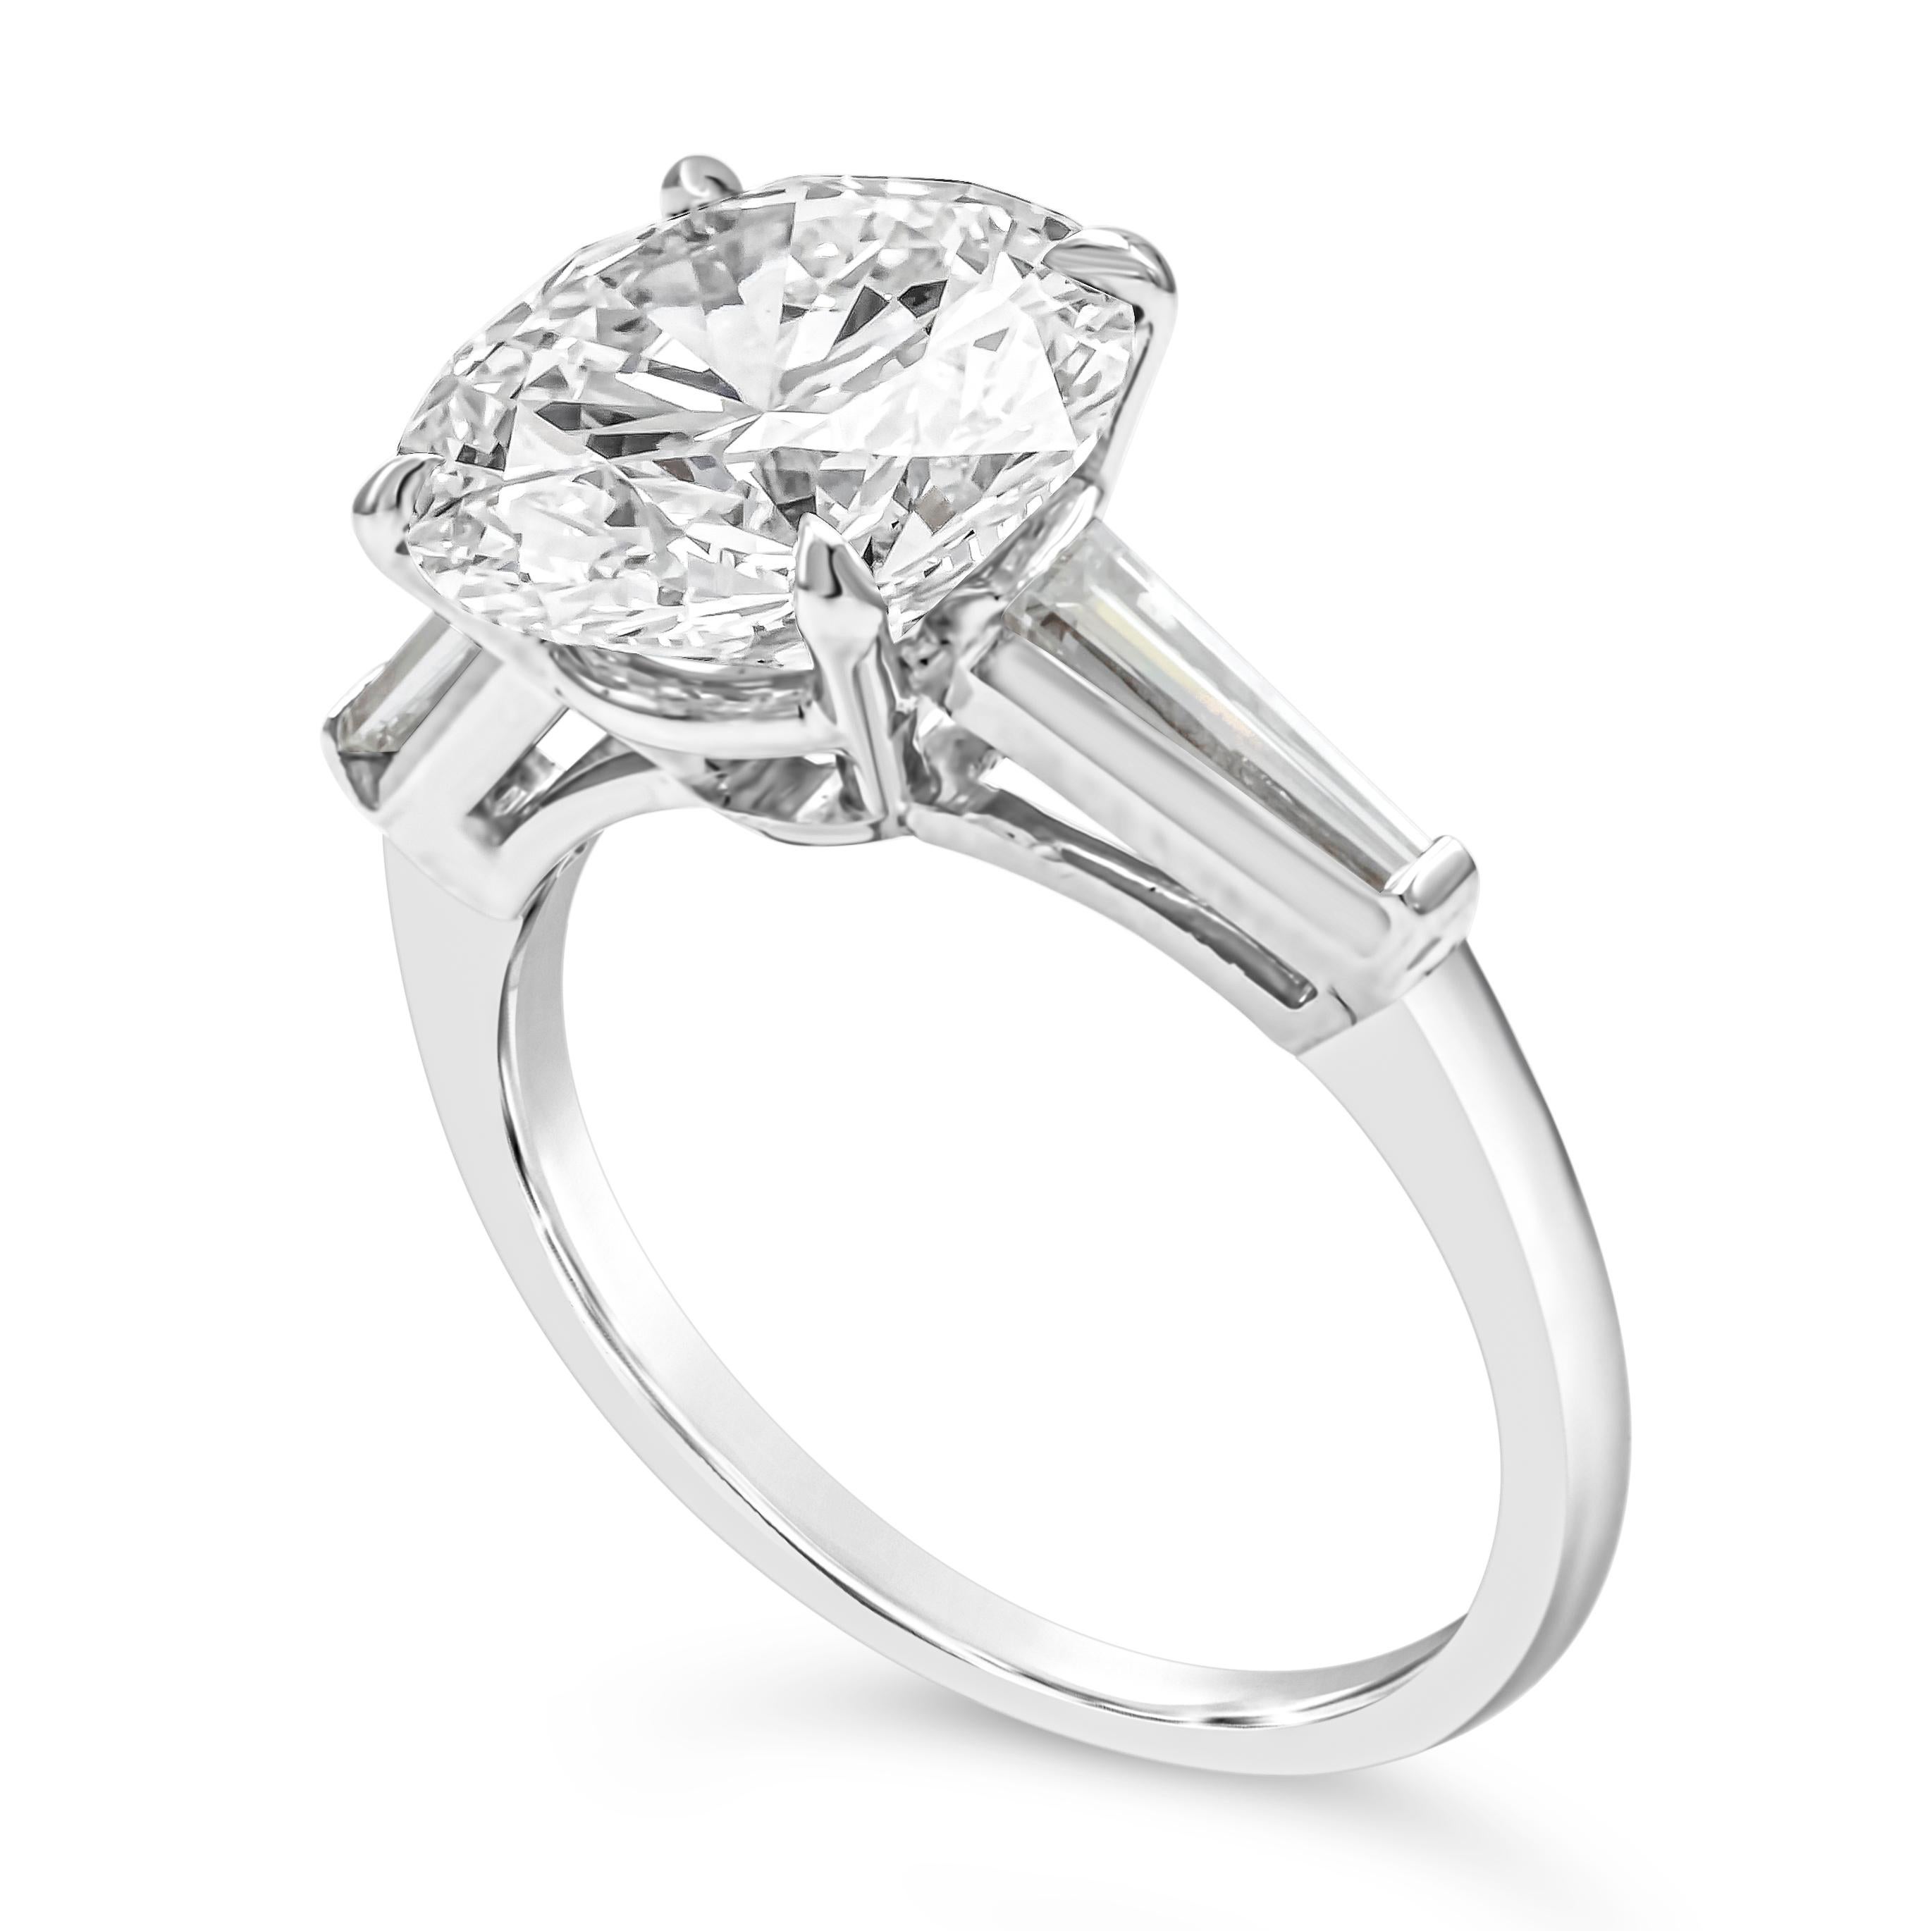 rounded rectangle diamond ring